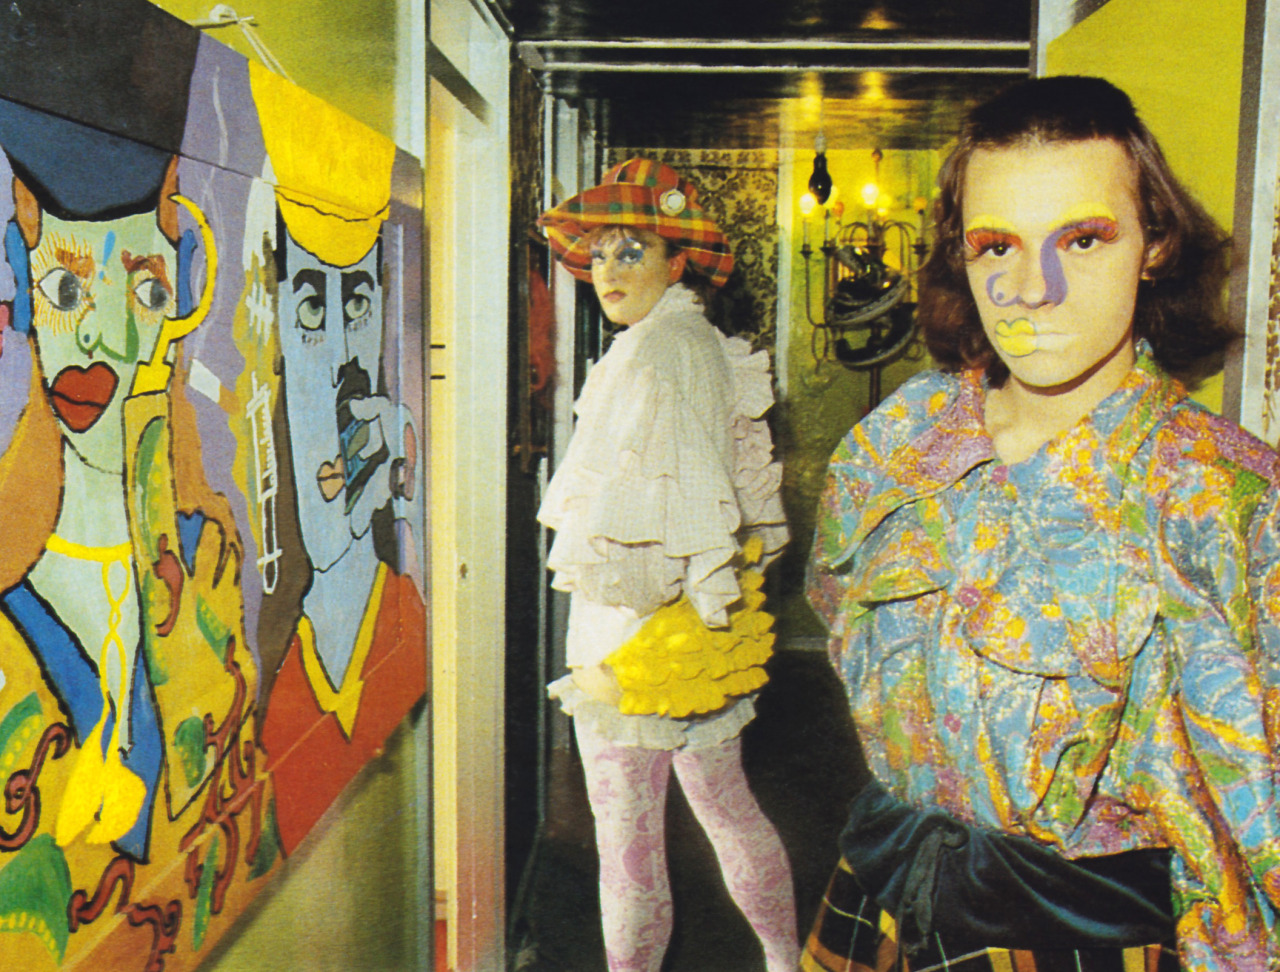 periodicult:
“ Leigh Bowery and Trojan photographed by Steve Pike for i-D magazine, October 1984.
”